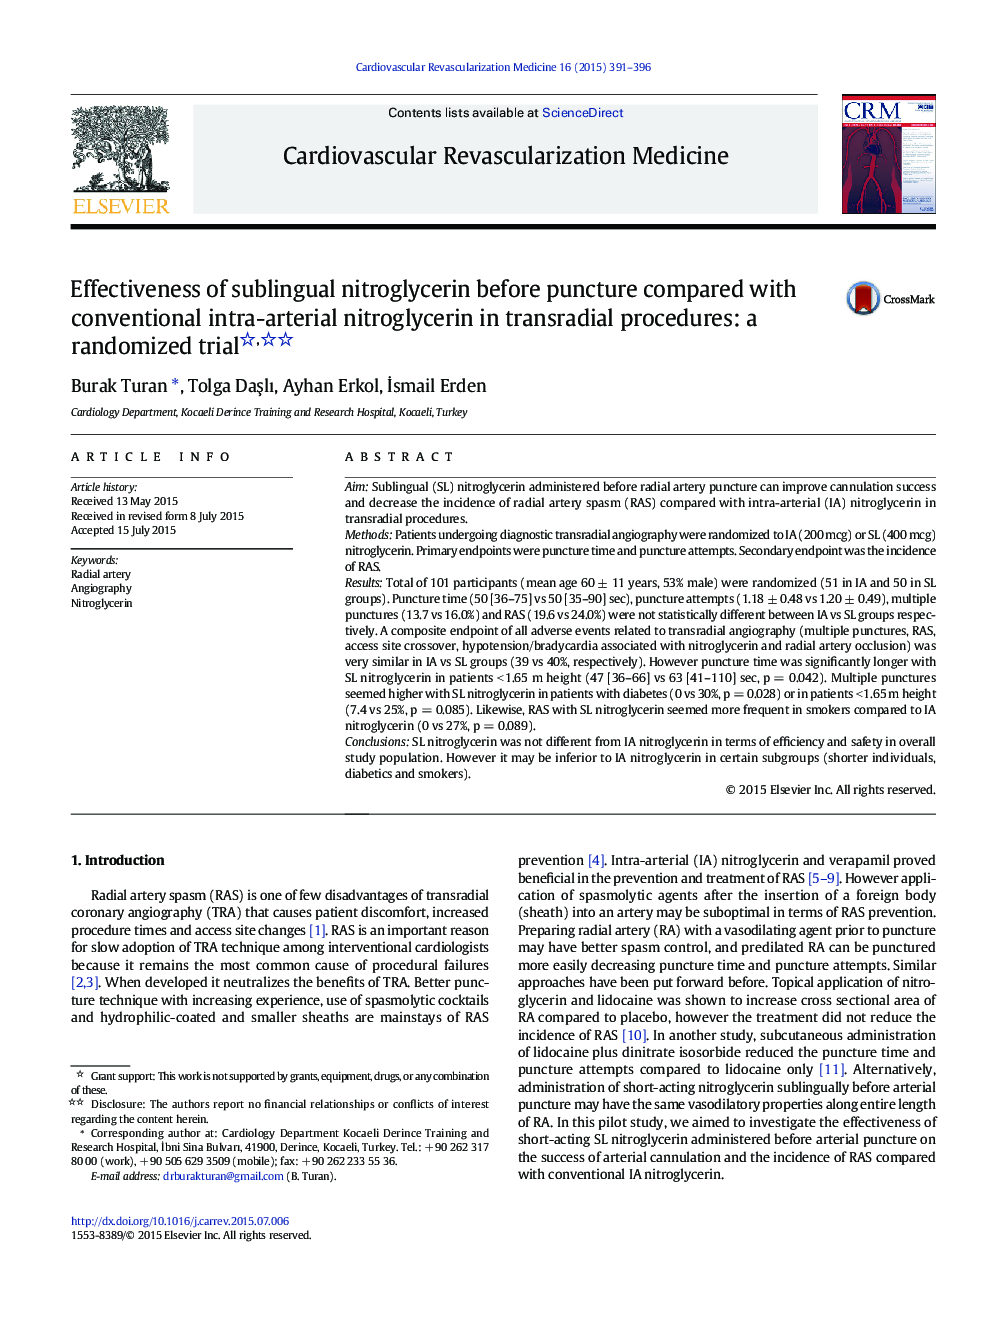 CoronaryEffectiveness of sublingual nitroglycerin before puncture compared with conventional intra-arterial nitroglycerin in transradial procedures: a randomized trial